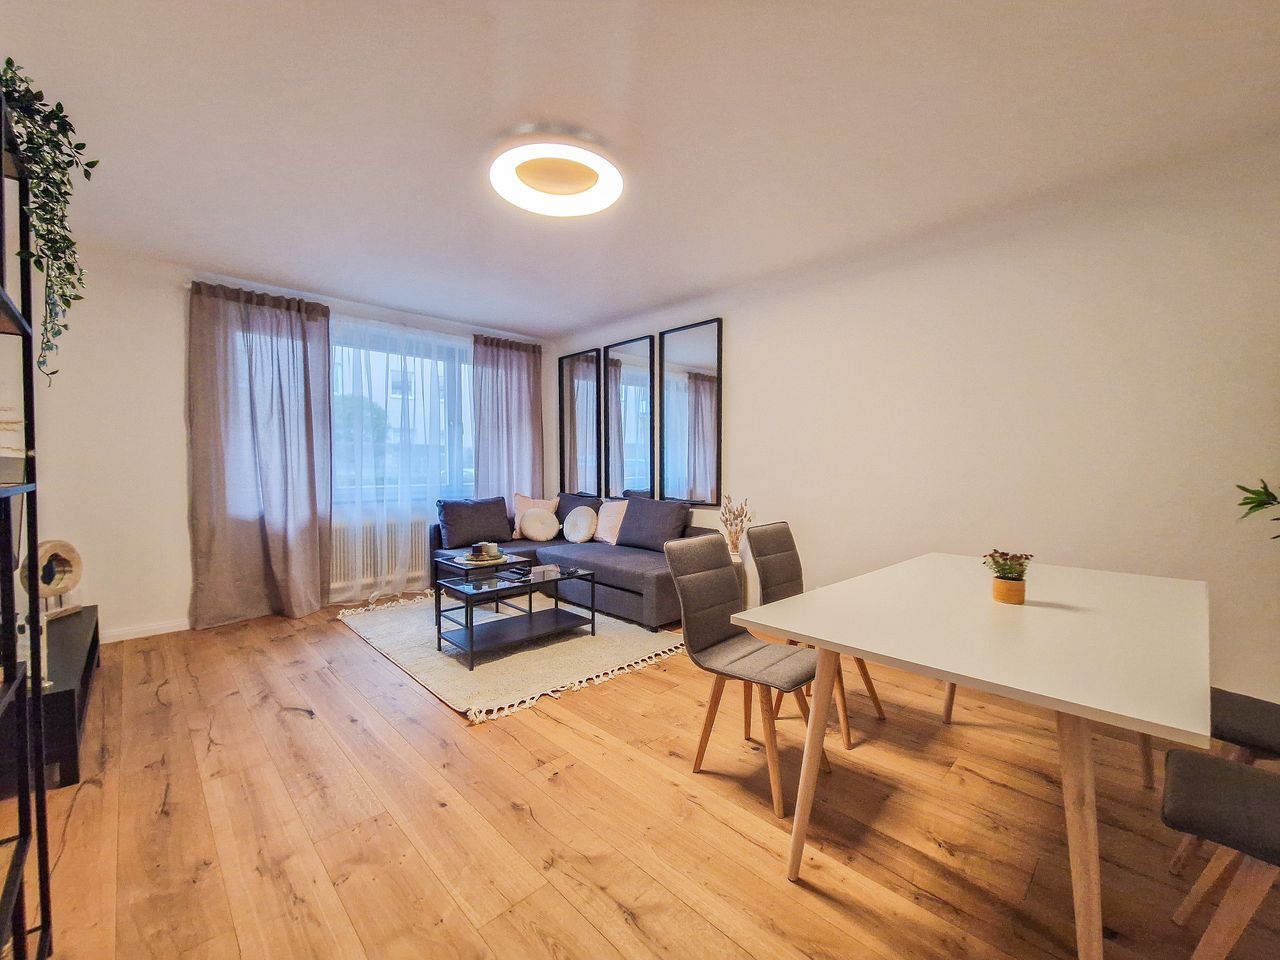 "Exclusive 3-bedroom apartment for business travelers in excellent location - Flotowgasse 18, 1190 Vienna"